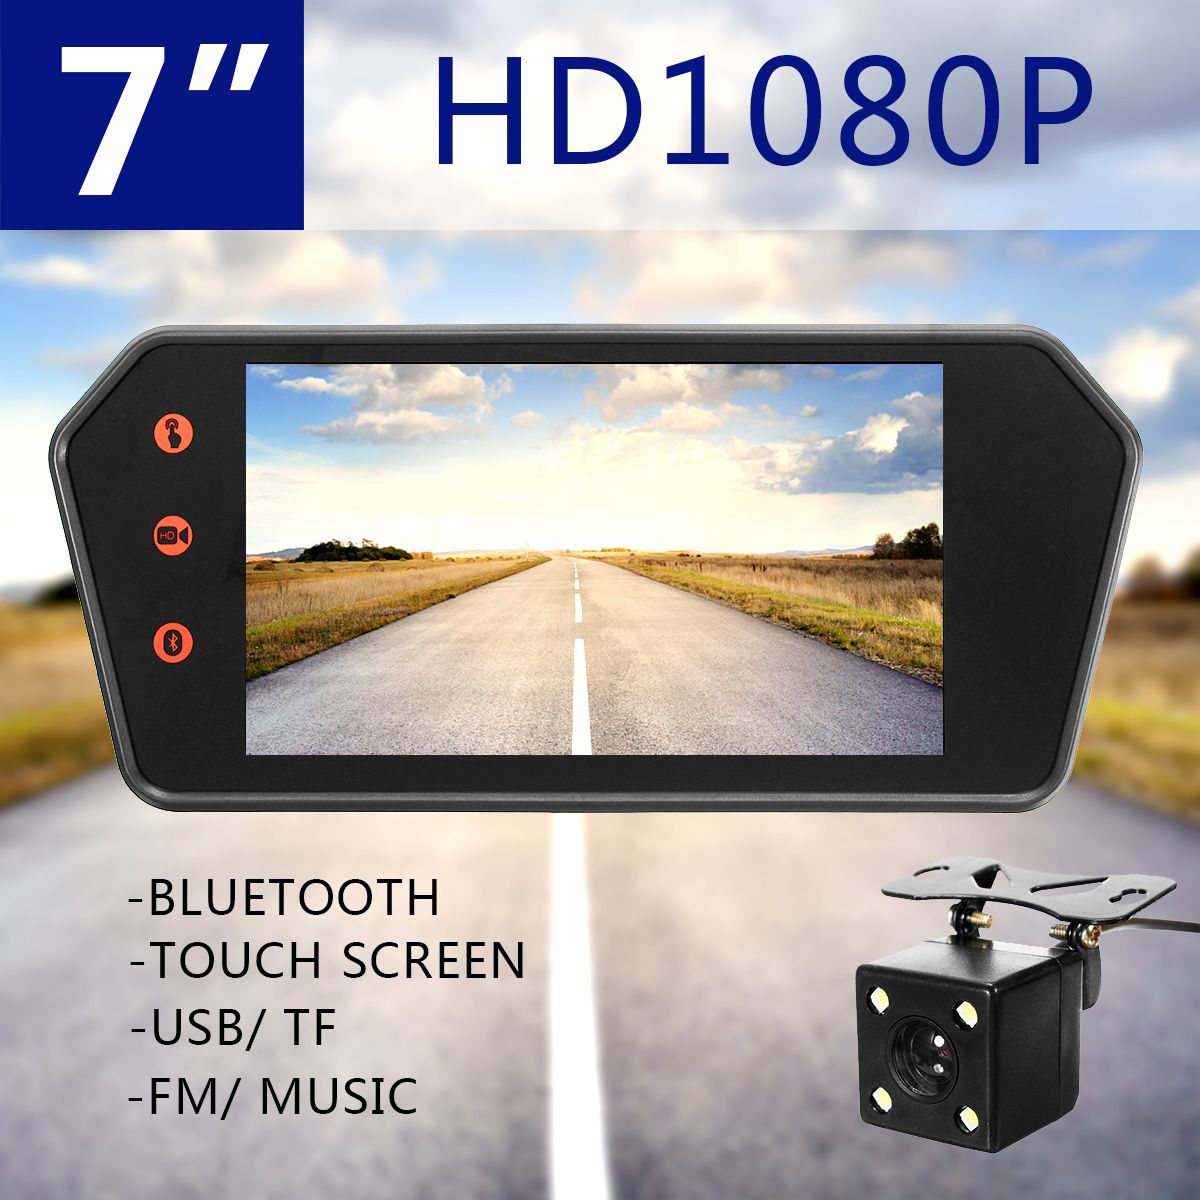 7-Inch-LCD-bluetooth-Monitor-Touch-Screen-MP5-HD-Reversing-Camera-Car-Rear-View-Parking-1202450